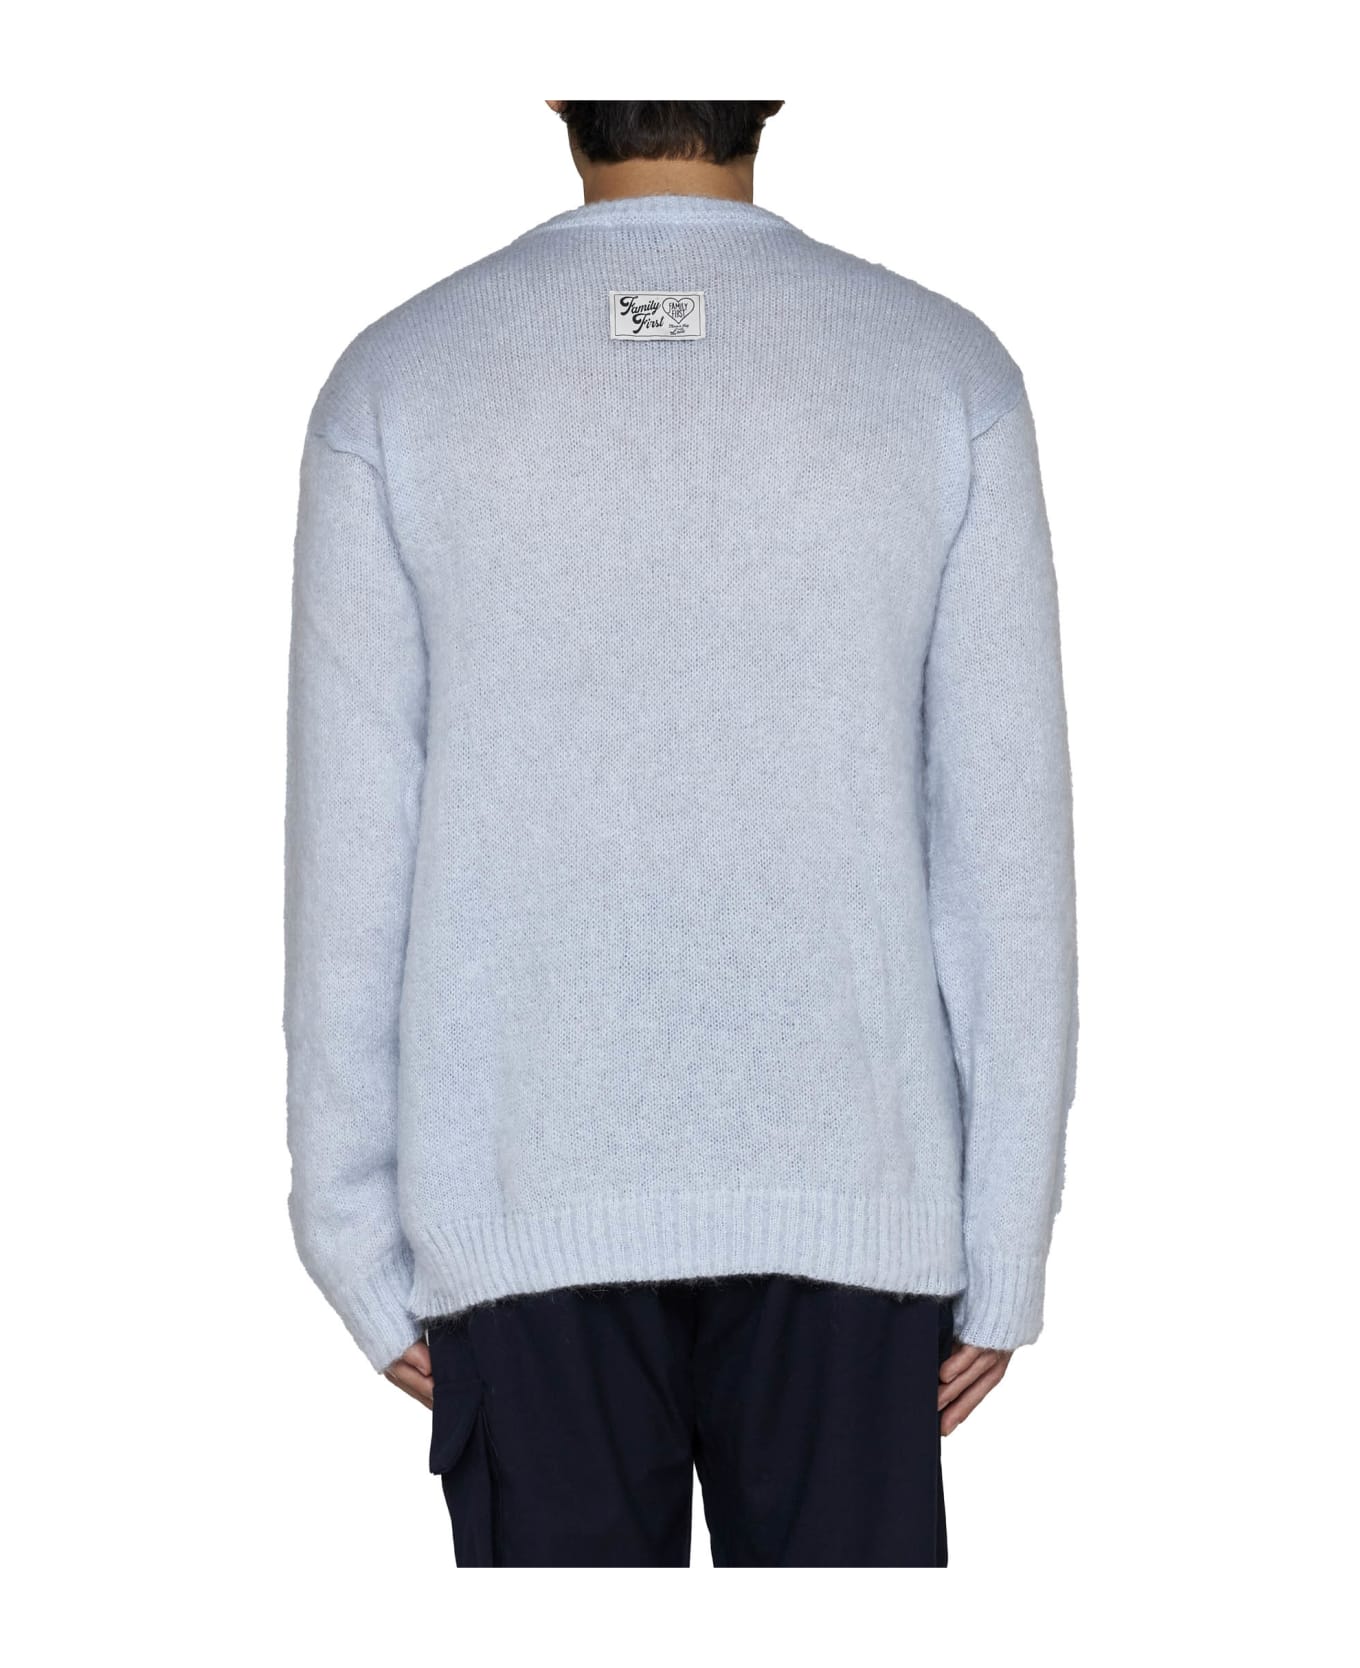 Family First Milano Sweater - Light blue